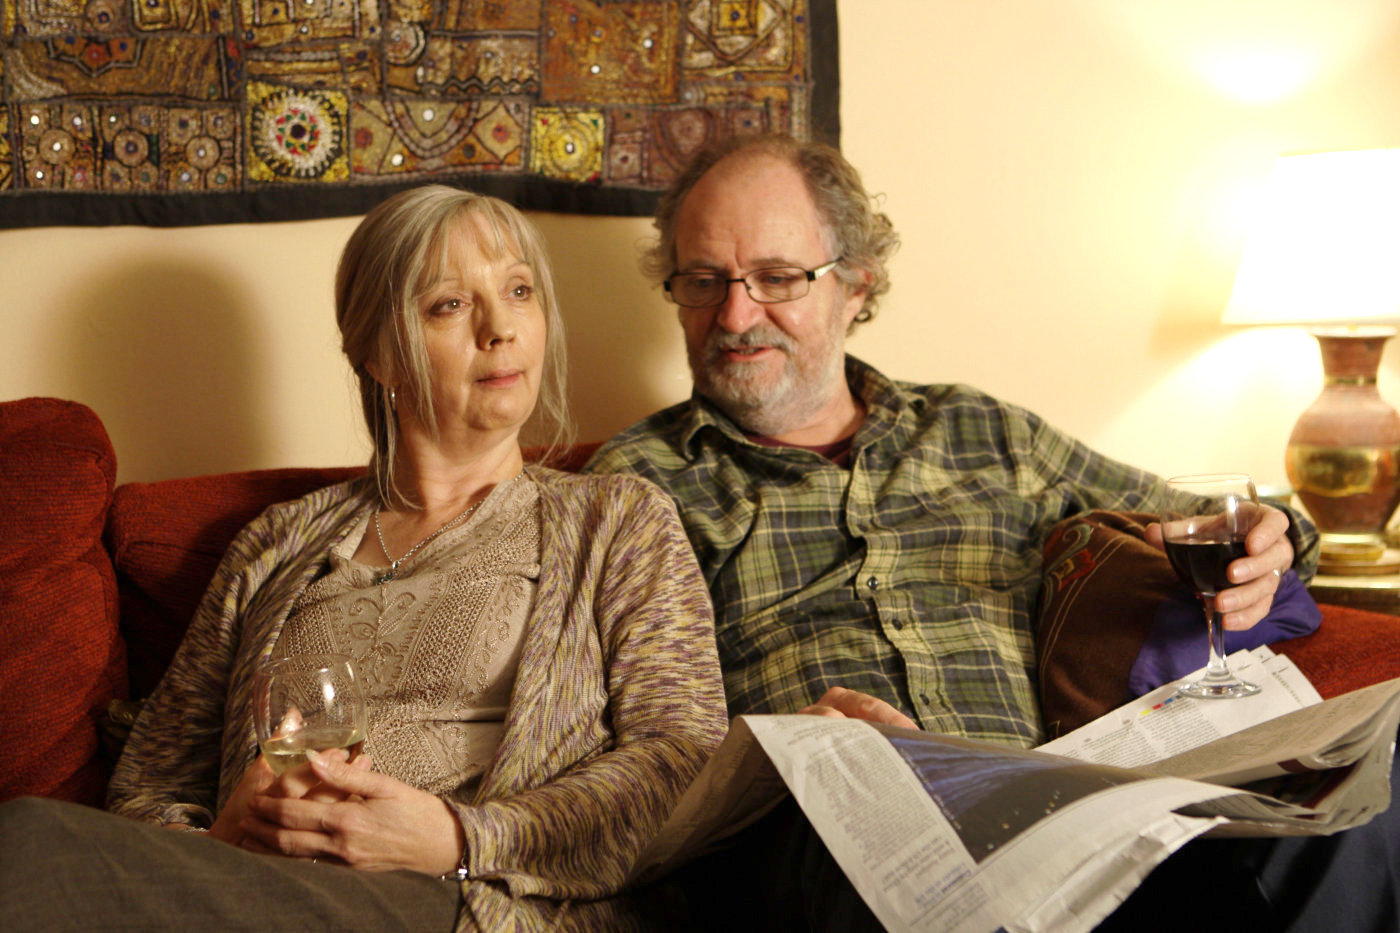 Ruth Sheen stars as Gerri and Jim Broadbent stars as Tom in Sony Pictures Classics' Another Year (2010)